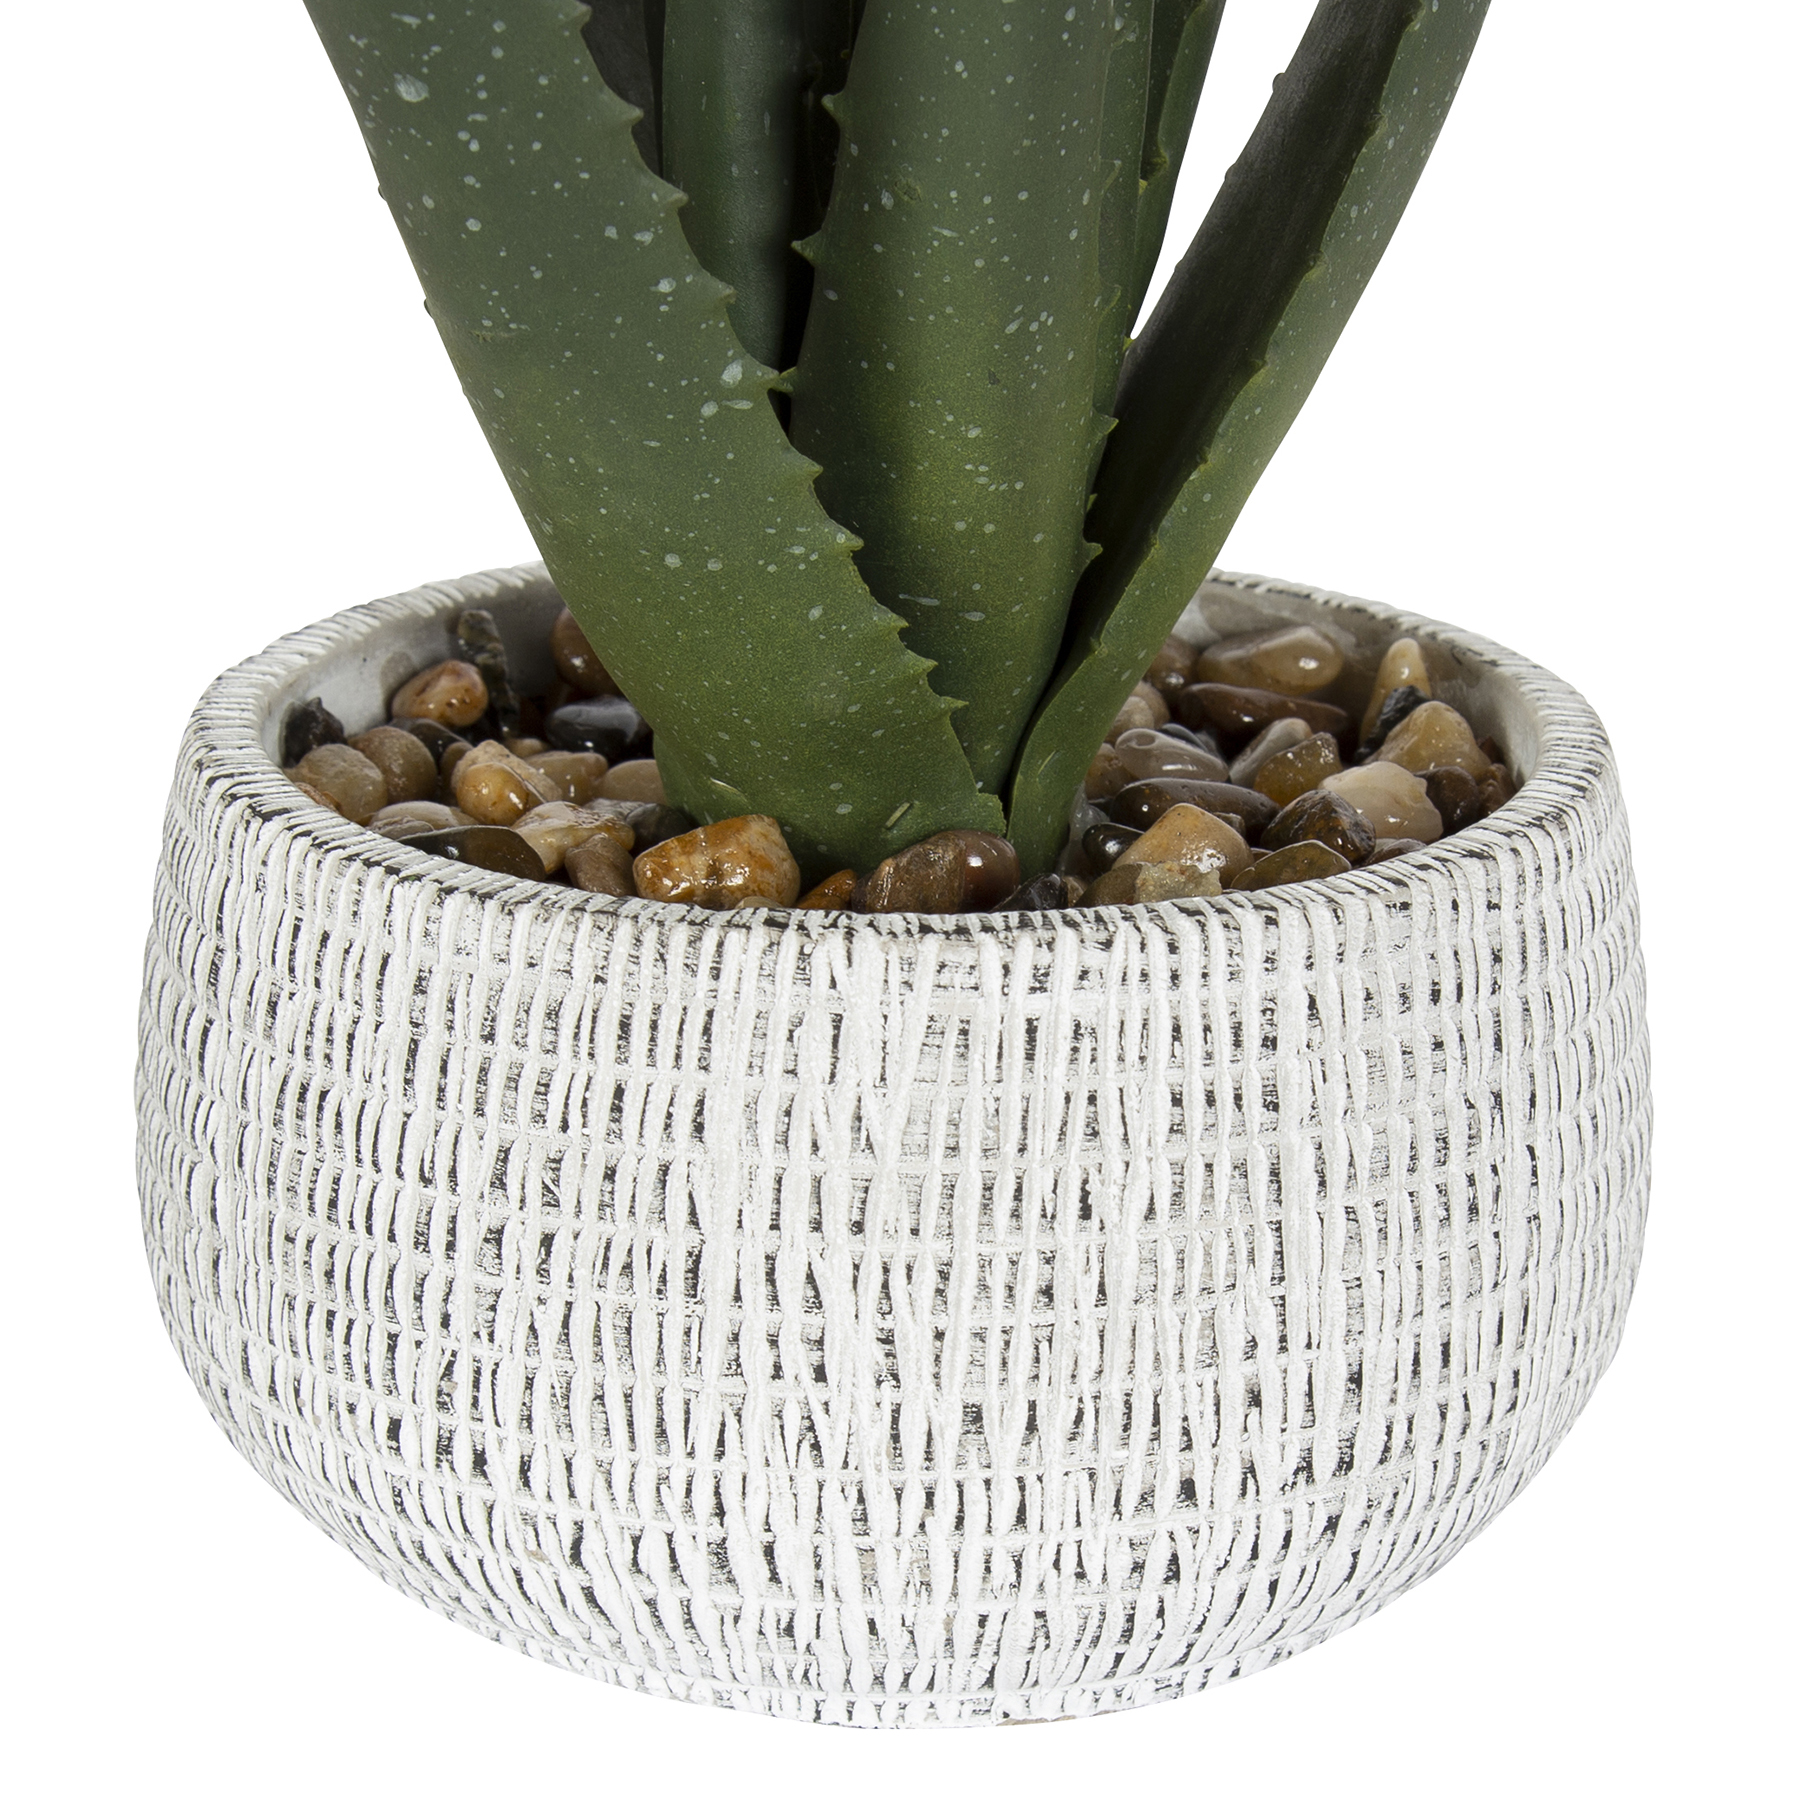 11" Artificial Aloe Plant in White and Black Stone Planter by Better Homes & Gardens - image 2 of 5